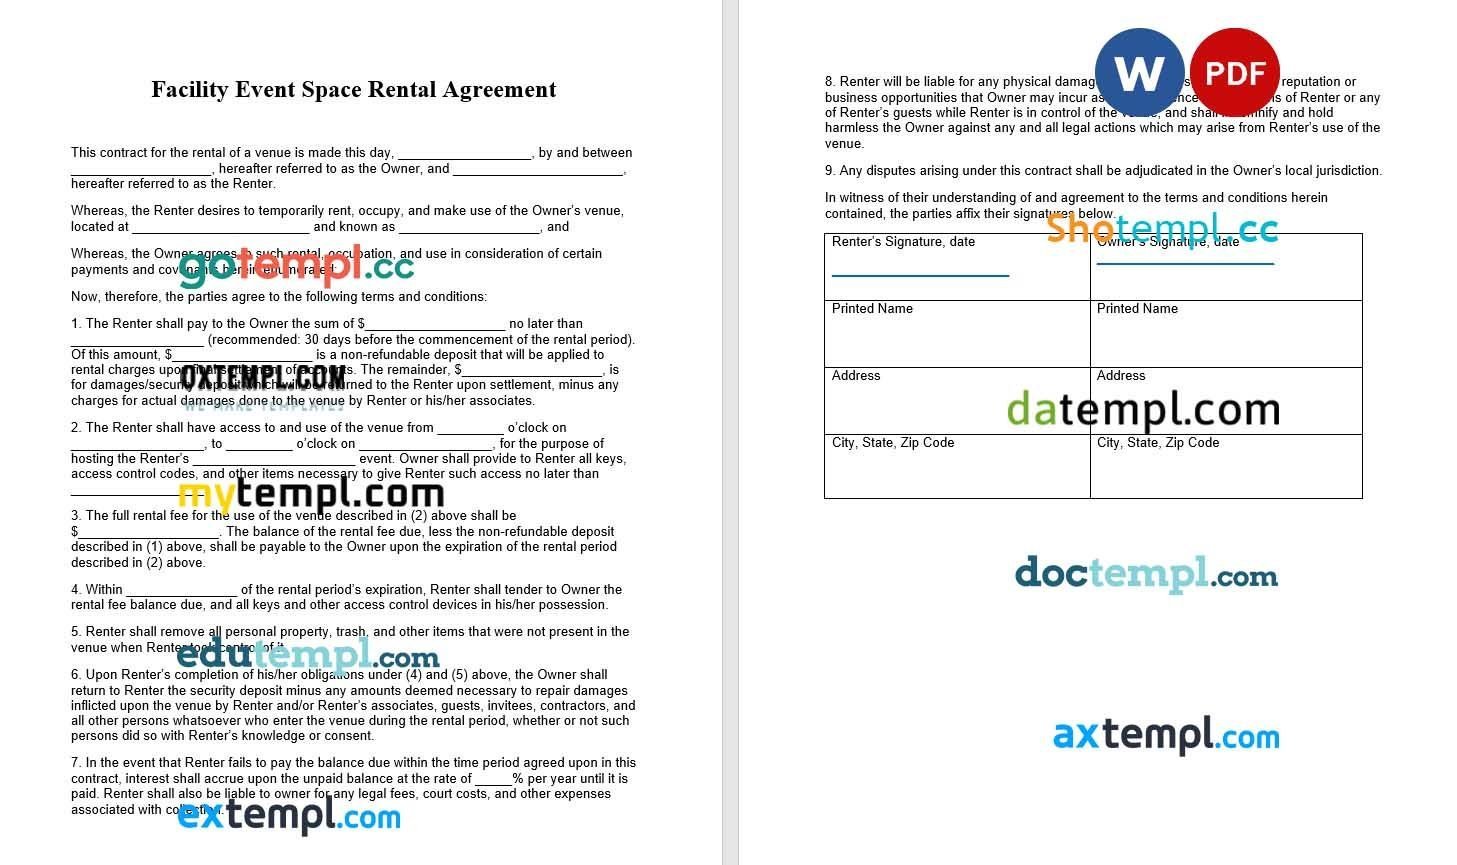 Facility Event Space Rental Agreement Word example, fully editable